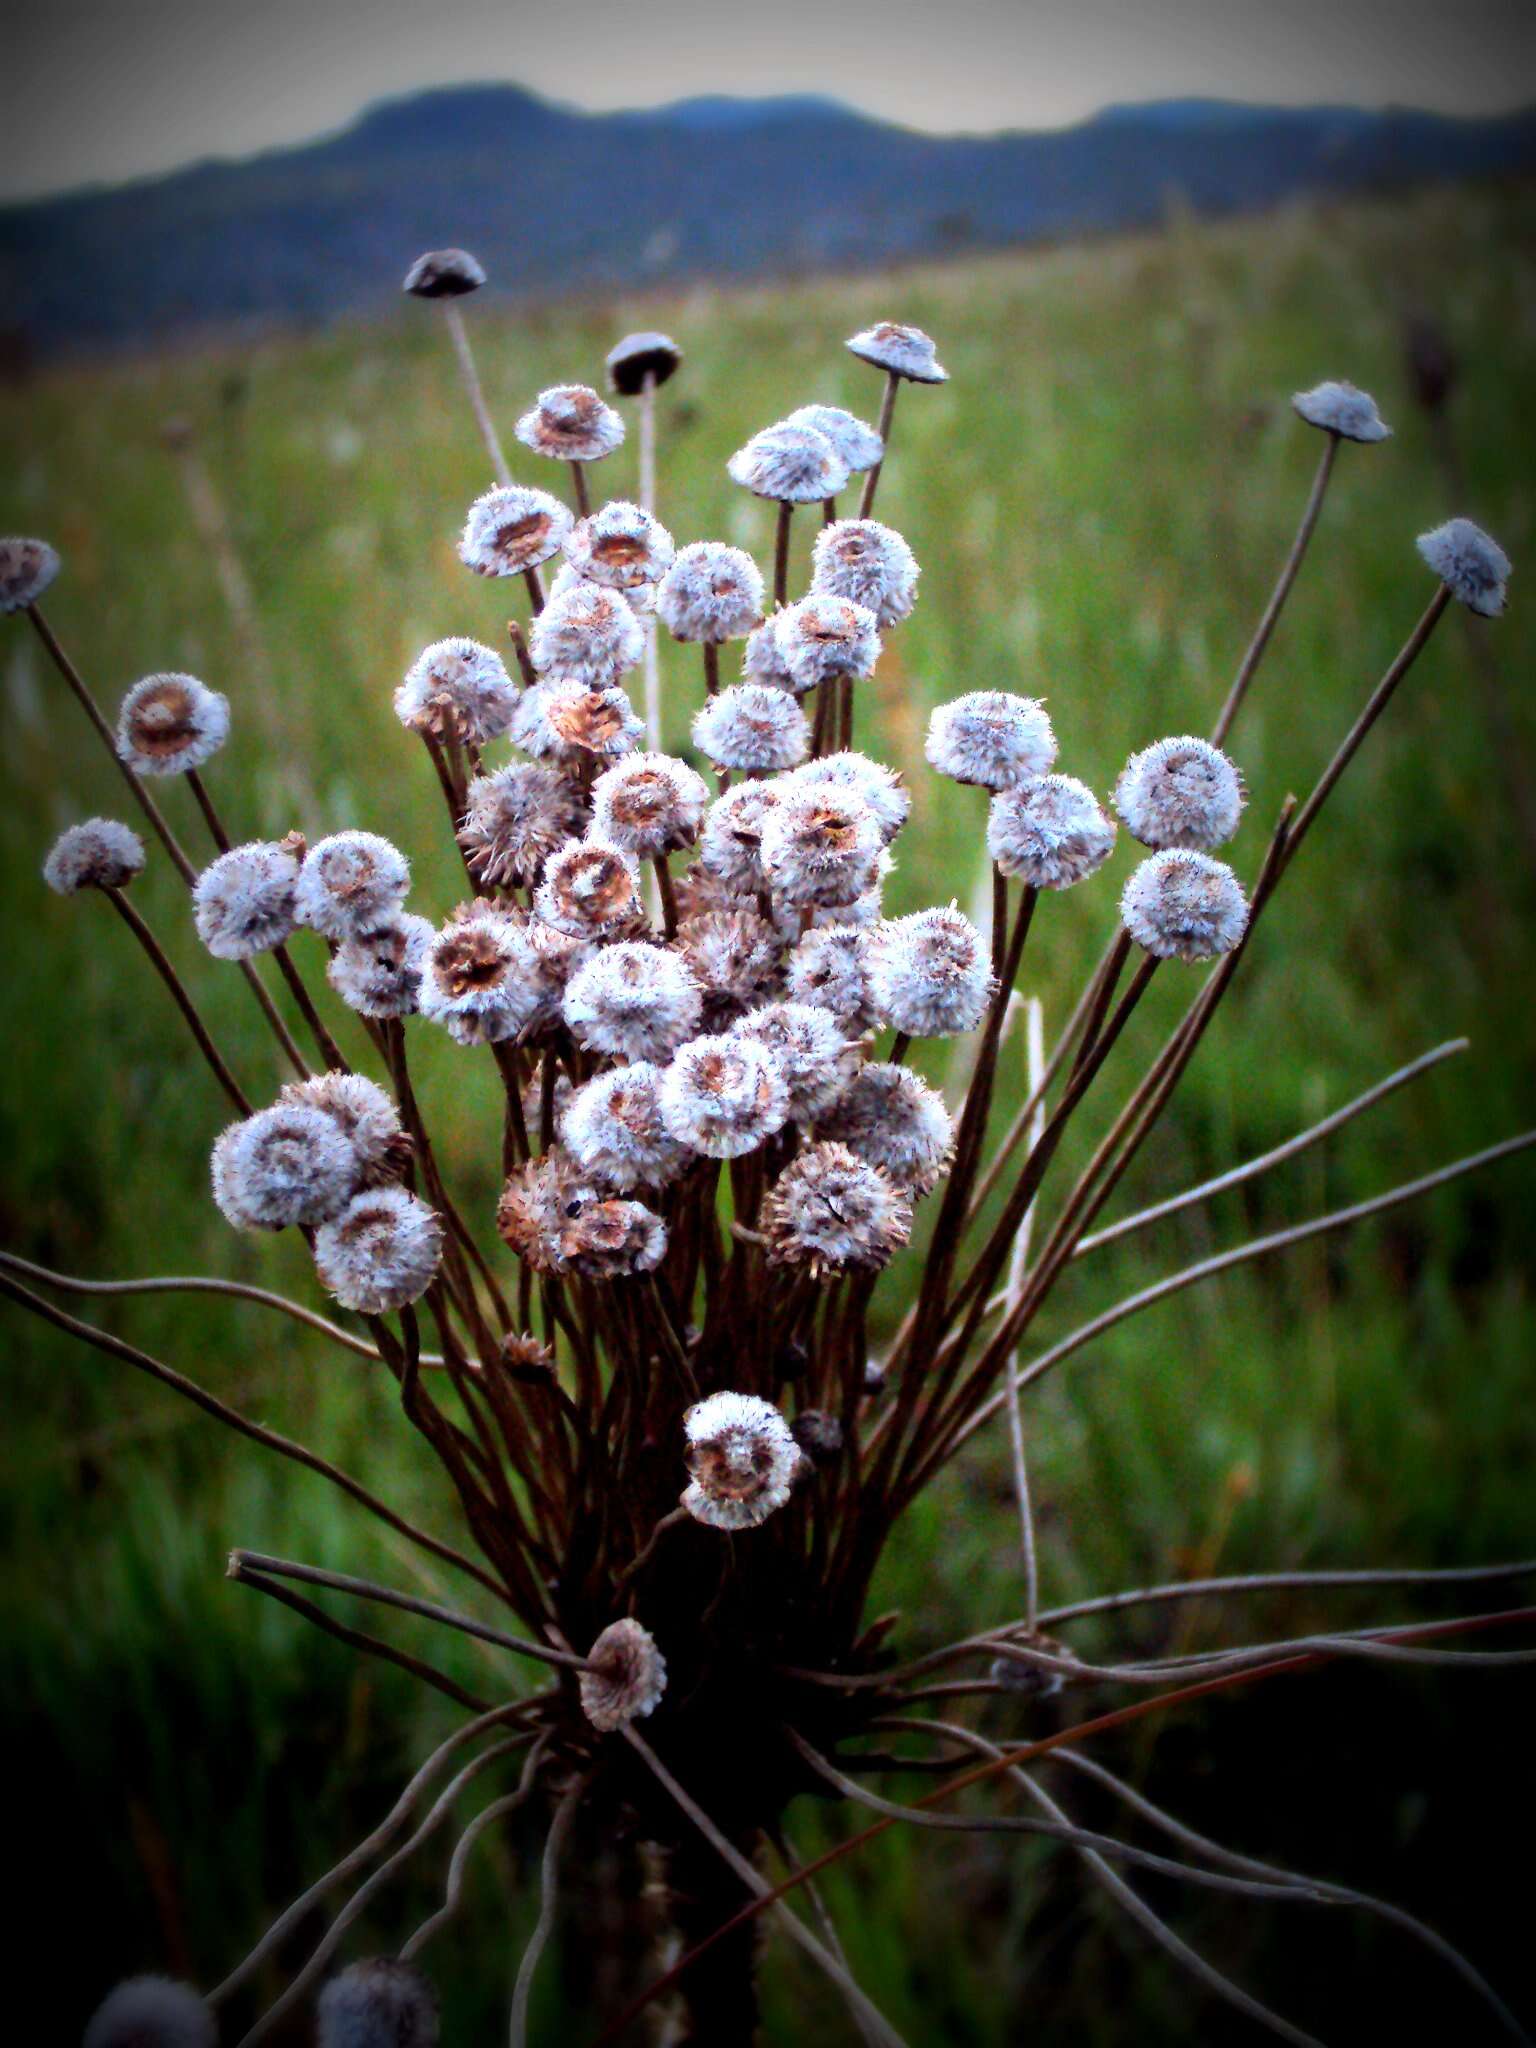 Image of pipewort family